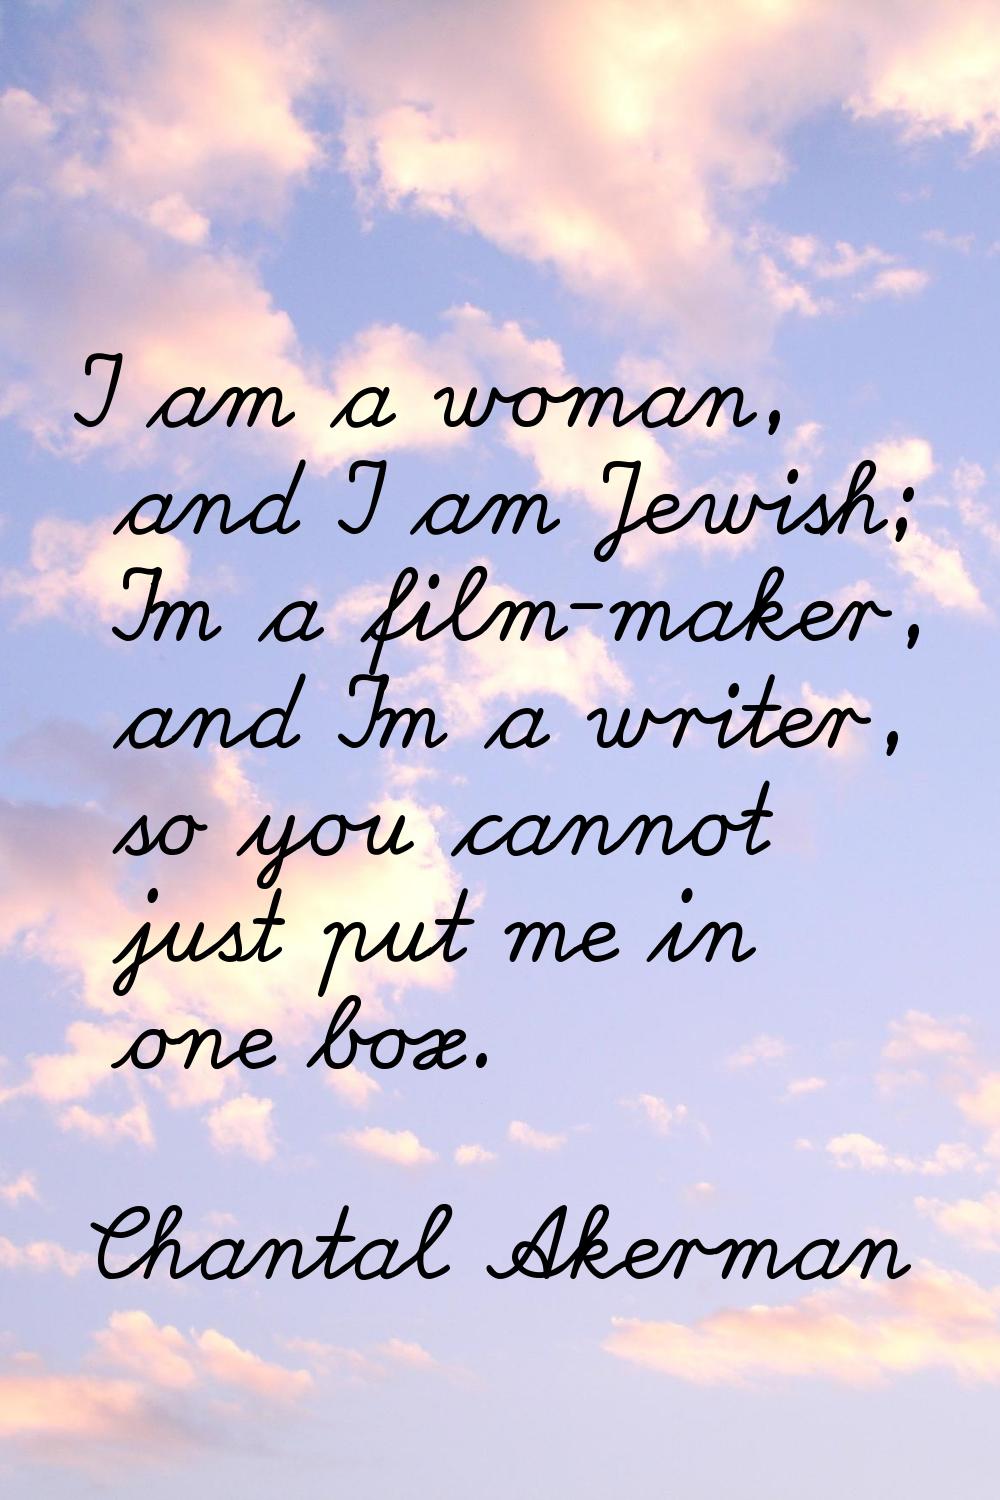 I am a woman, and I am Jewish; I'm a film-maker, and I'm a writer, so you cannot just put me in one